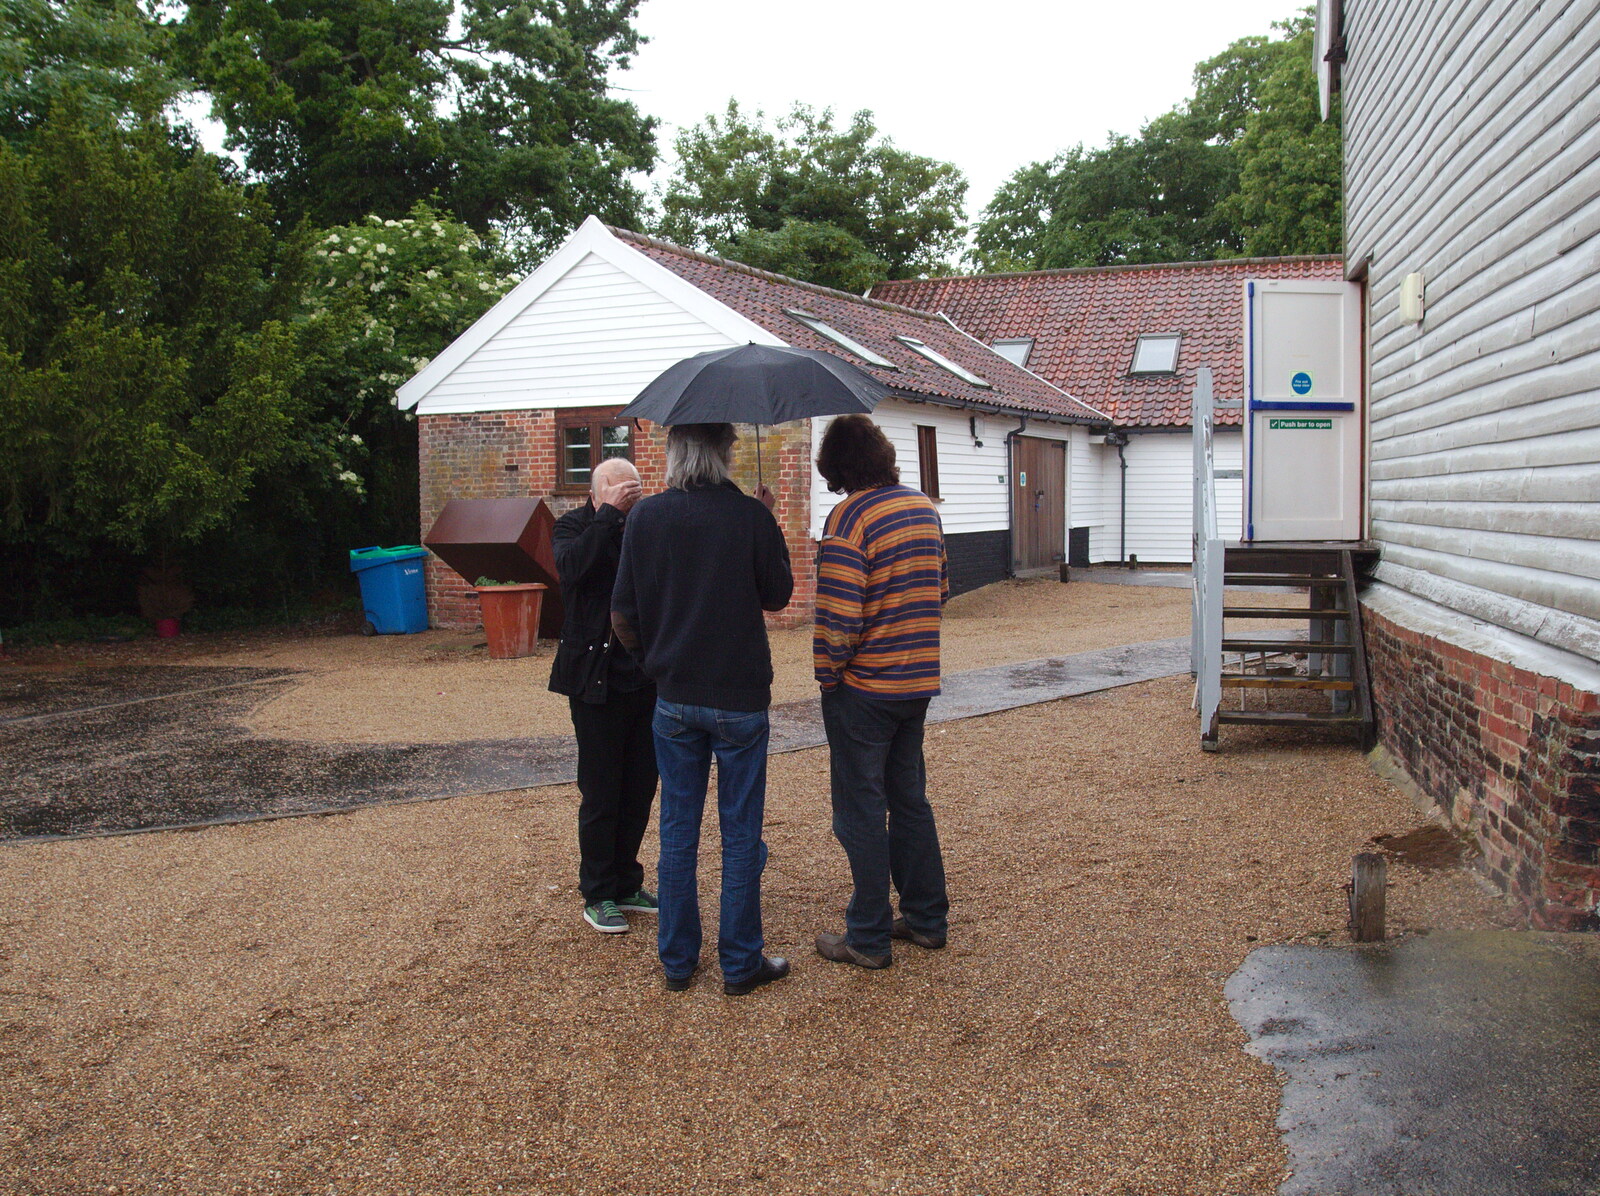 More under-umbrella action from The BBs Play Scrabble at Wingfield Barns, Wingfield, Suffolk - 24th May 2014